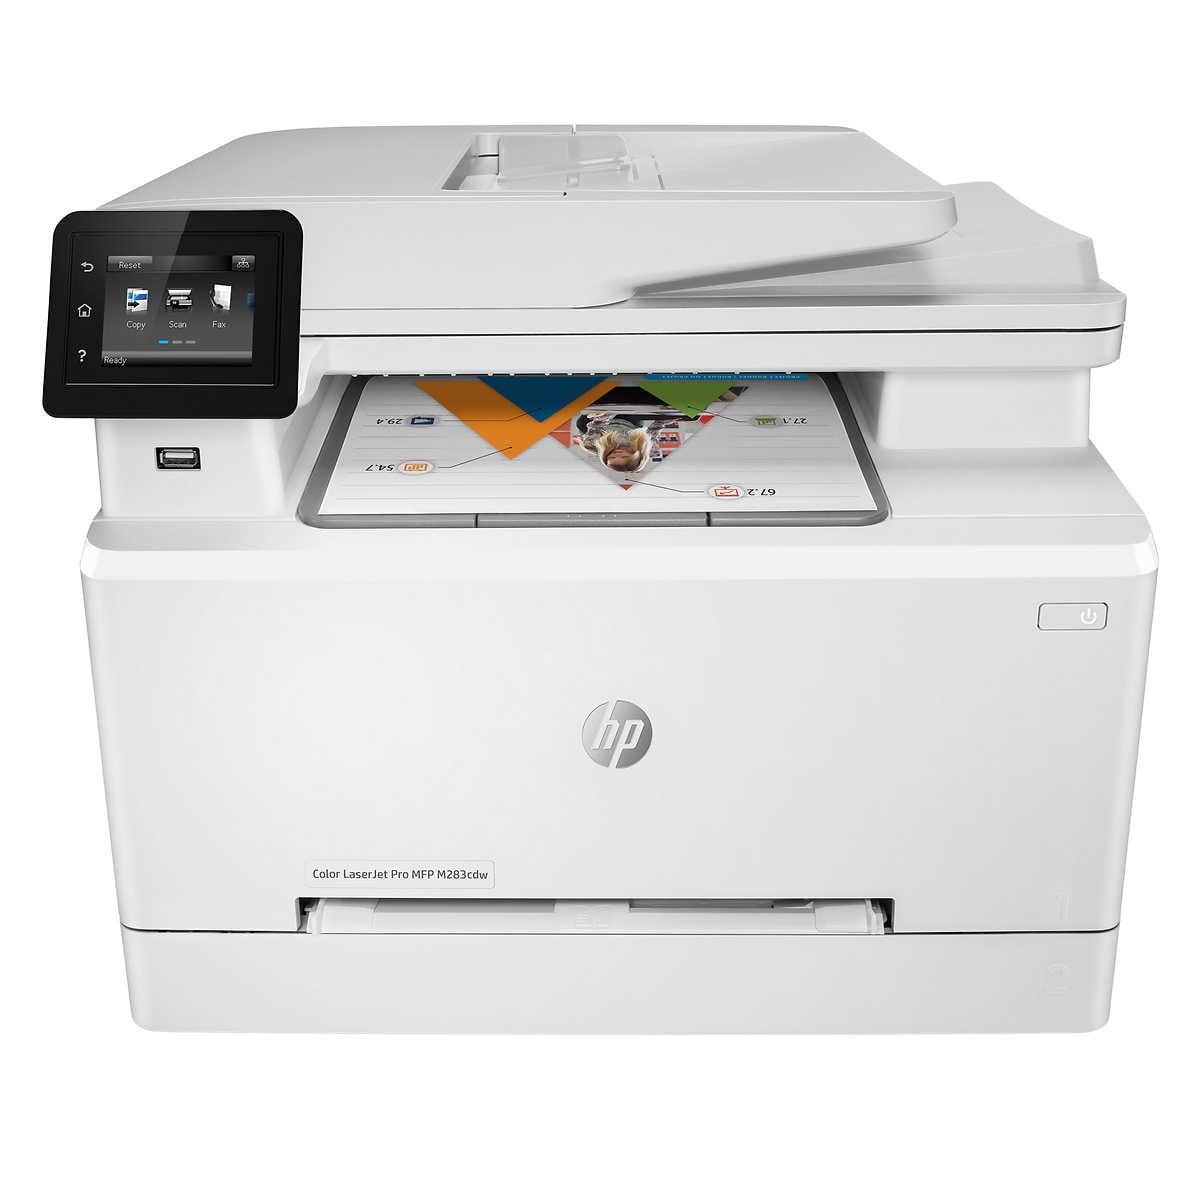 timer vluchtelingen Uitputting HP LaserJet Pro M283cdw two-sided Printing All-in-One Laser Wireless Color  Printer 7KW73A, Scan, Copy, Fax, Mobile, AirPrint, ePrint - Walmart.com